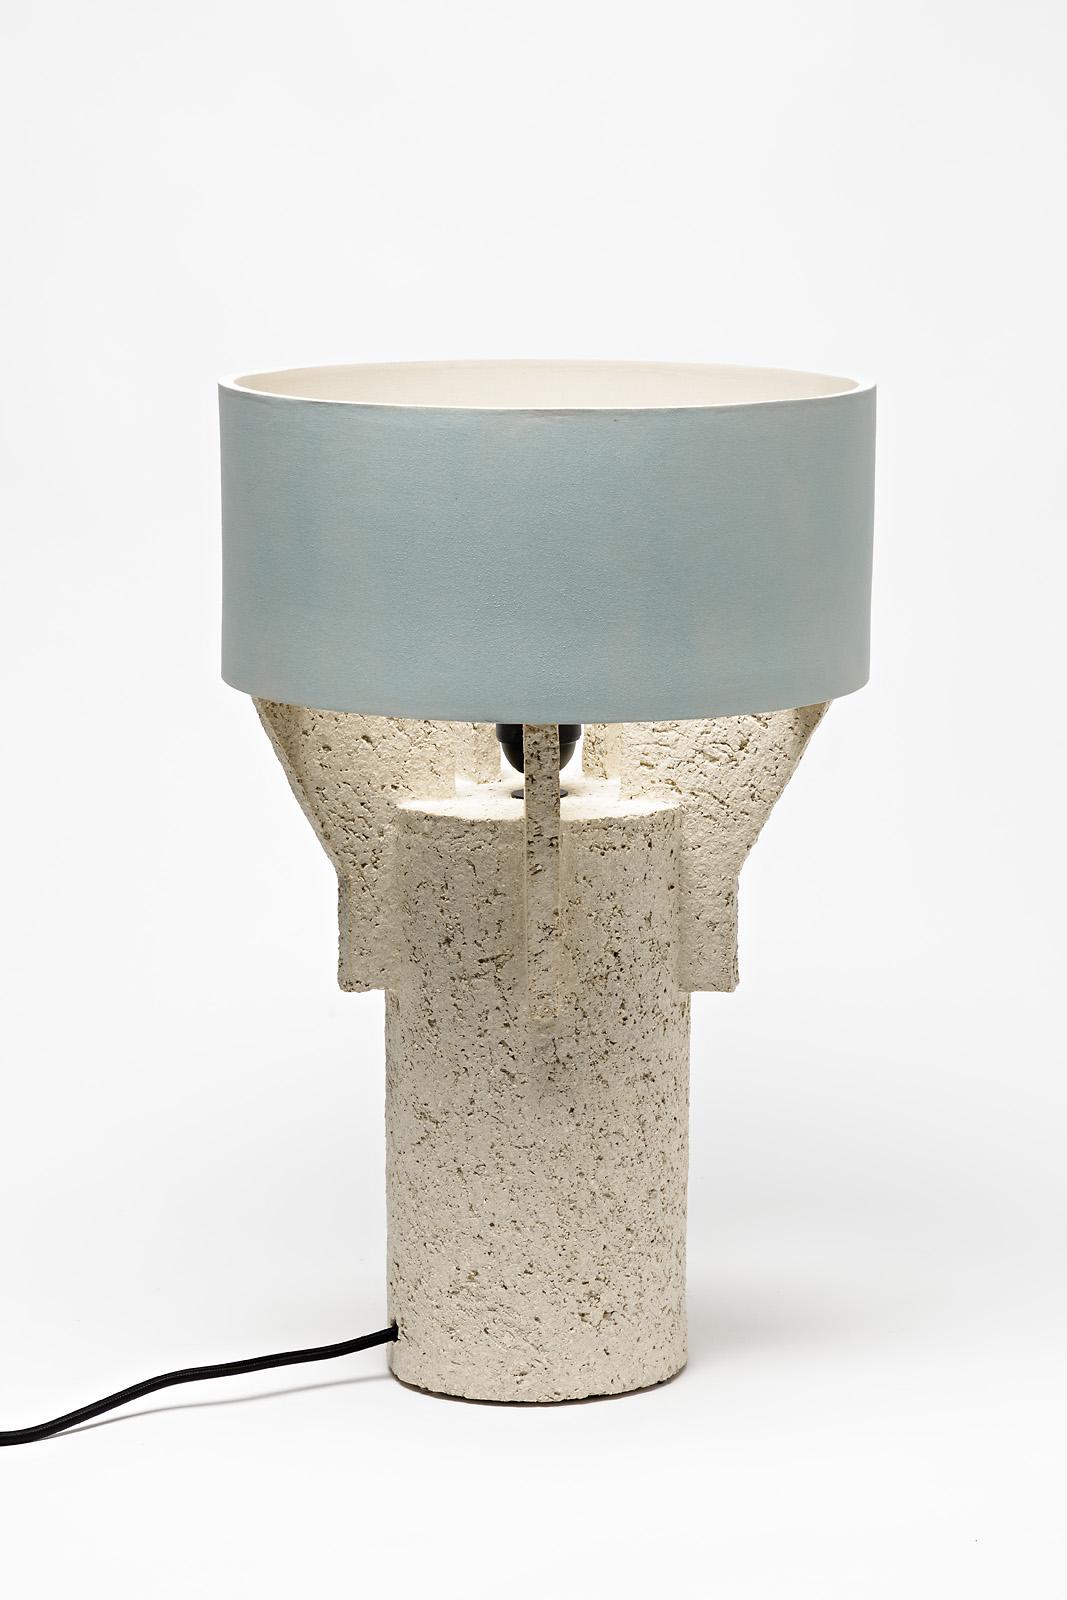 Beaux Arts Ceramic Table Lamp by Denis Castaing with Blue Glaze Decoration, 2019